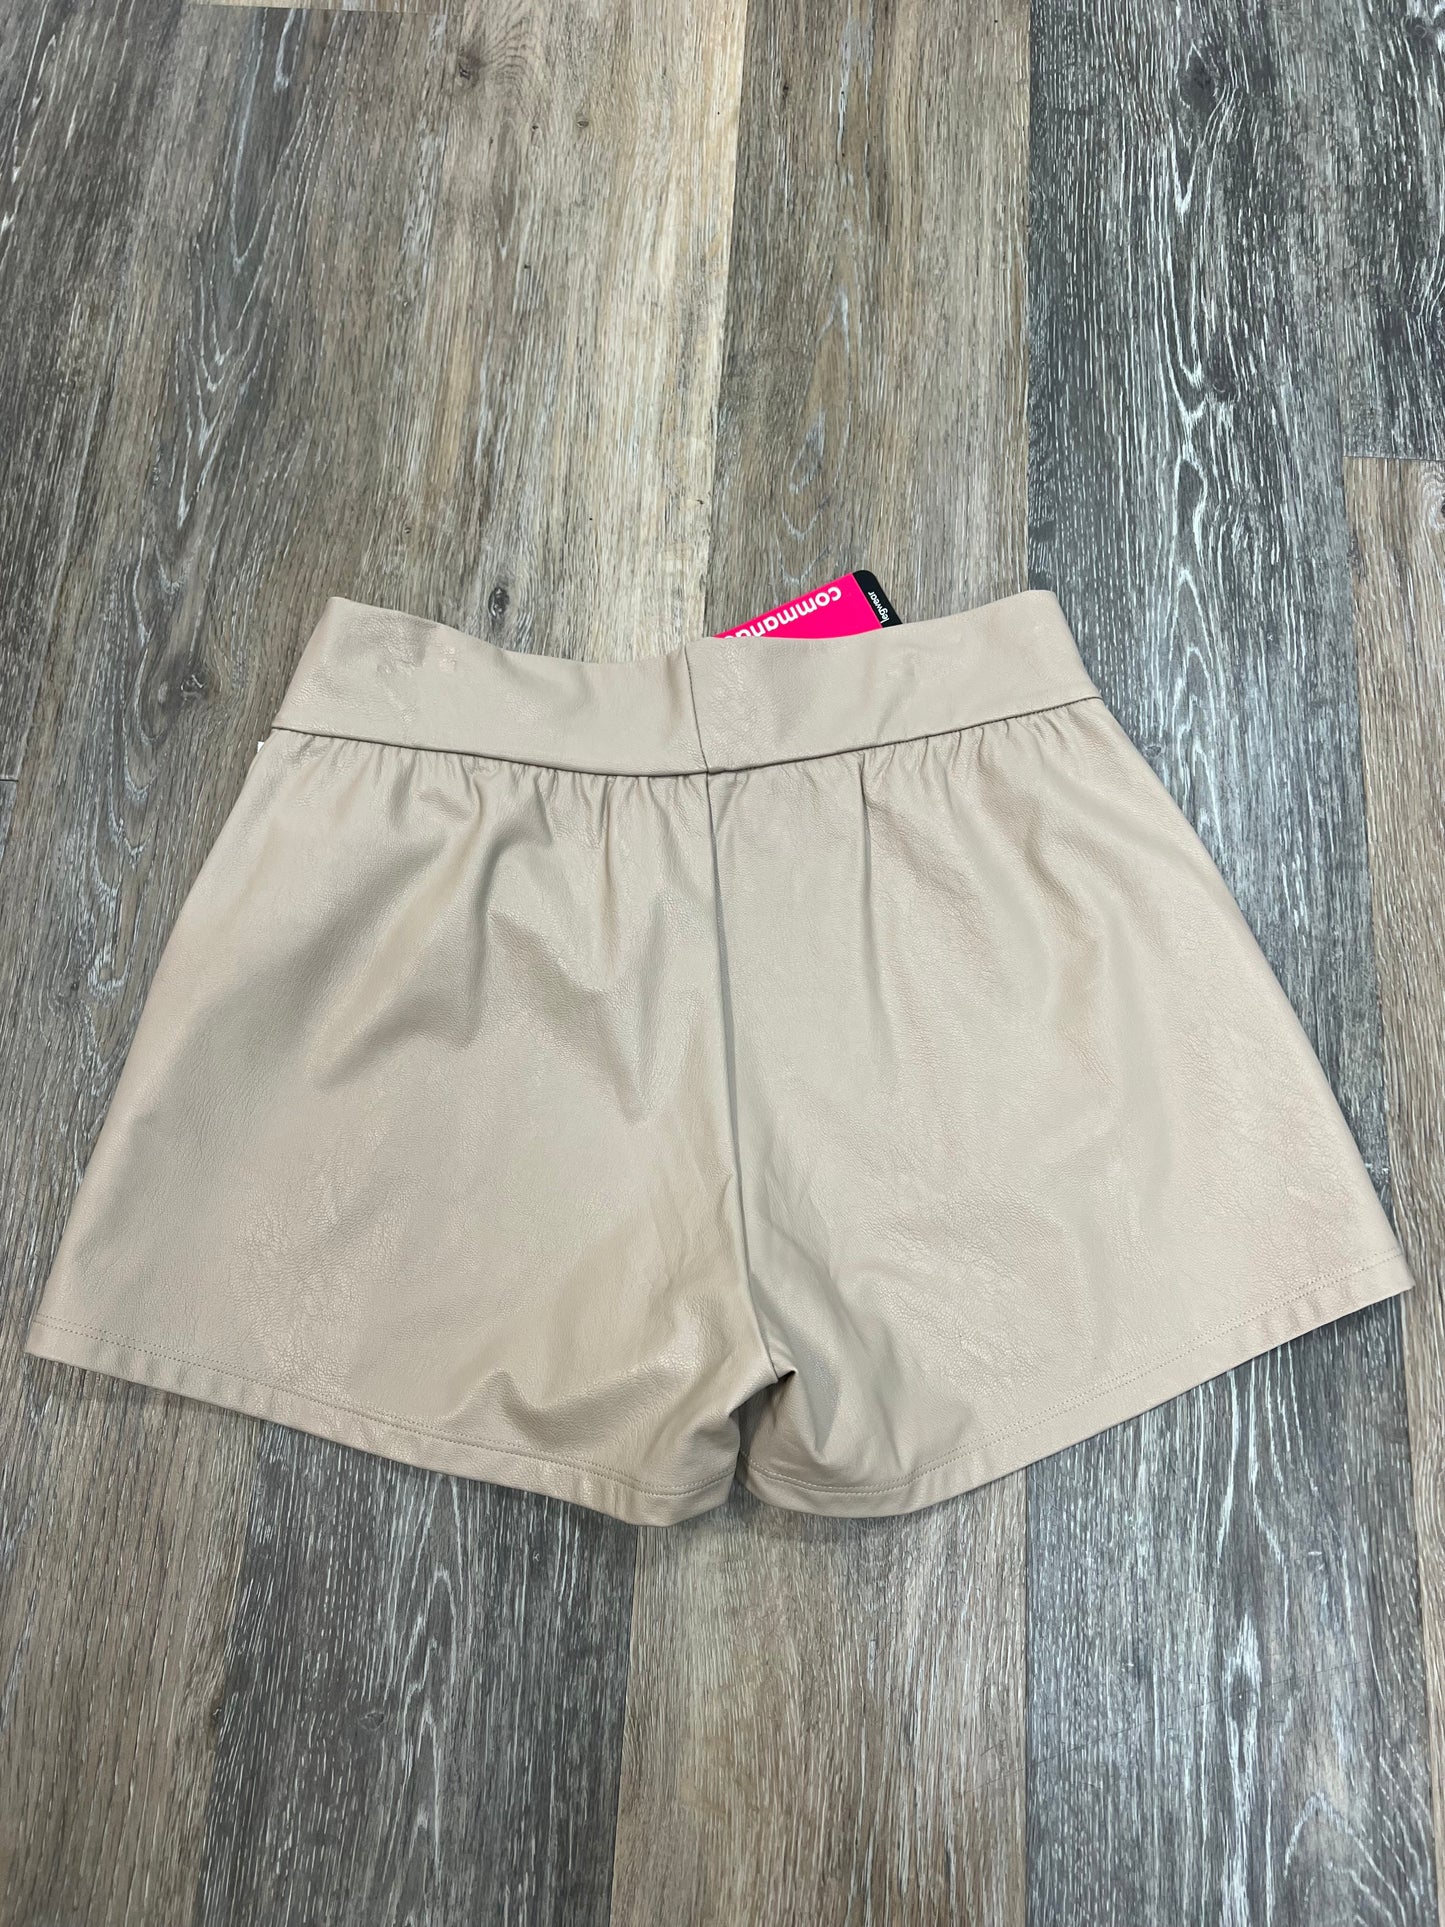 Shorts By Commando  Size: S